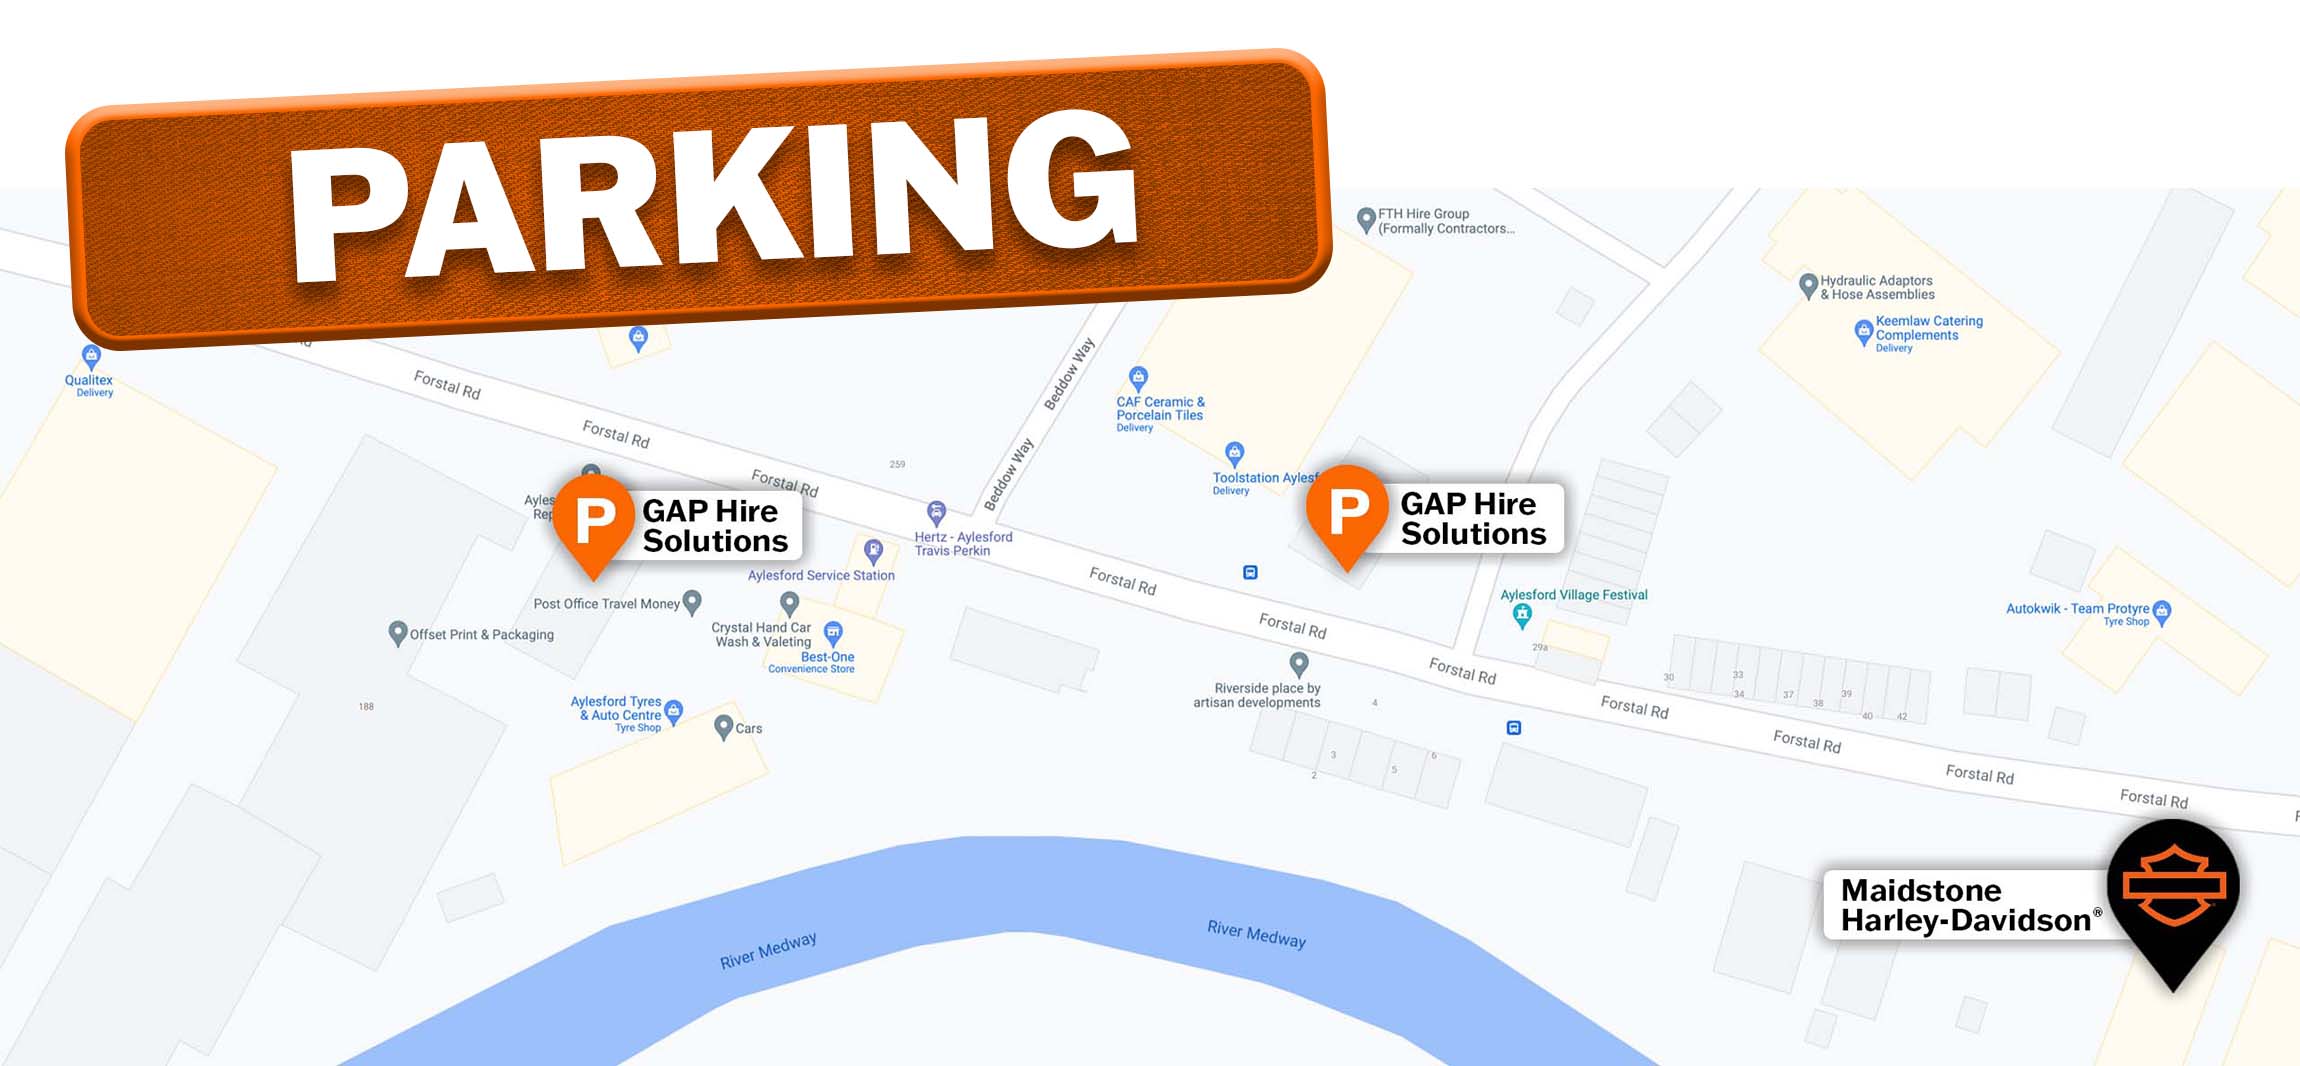 Available car parking at Maidstone Harley-Davidson's 1st July Summer BBQ